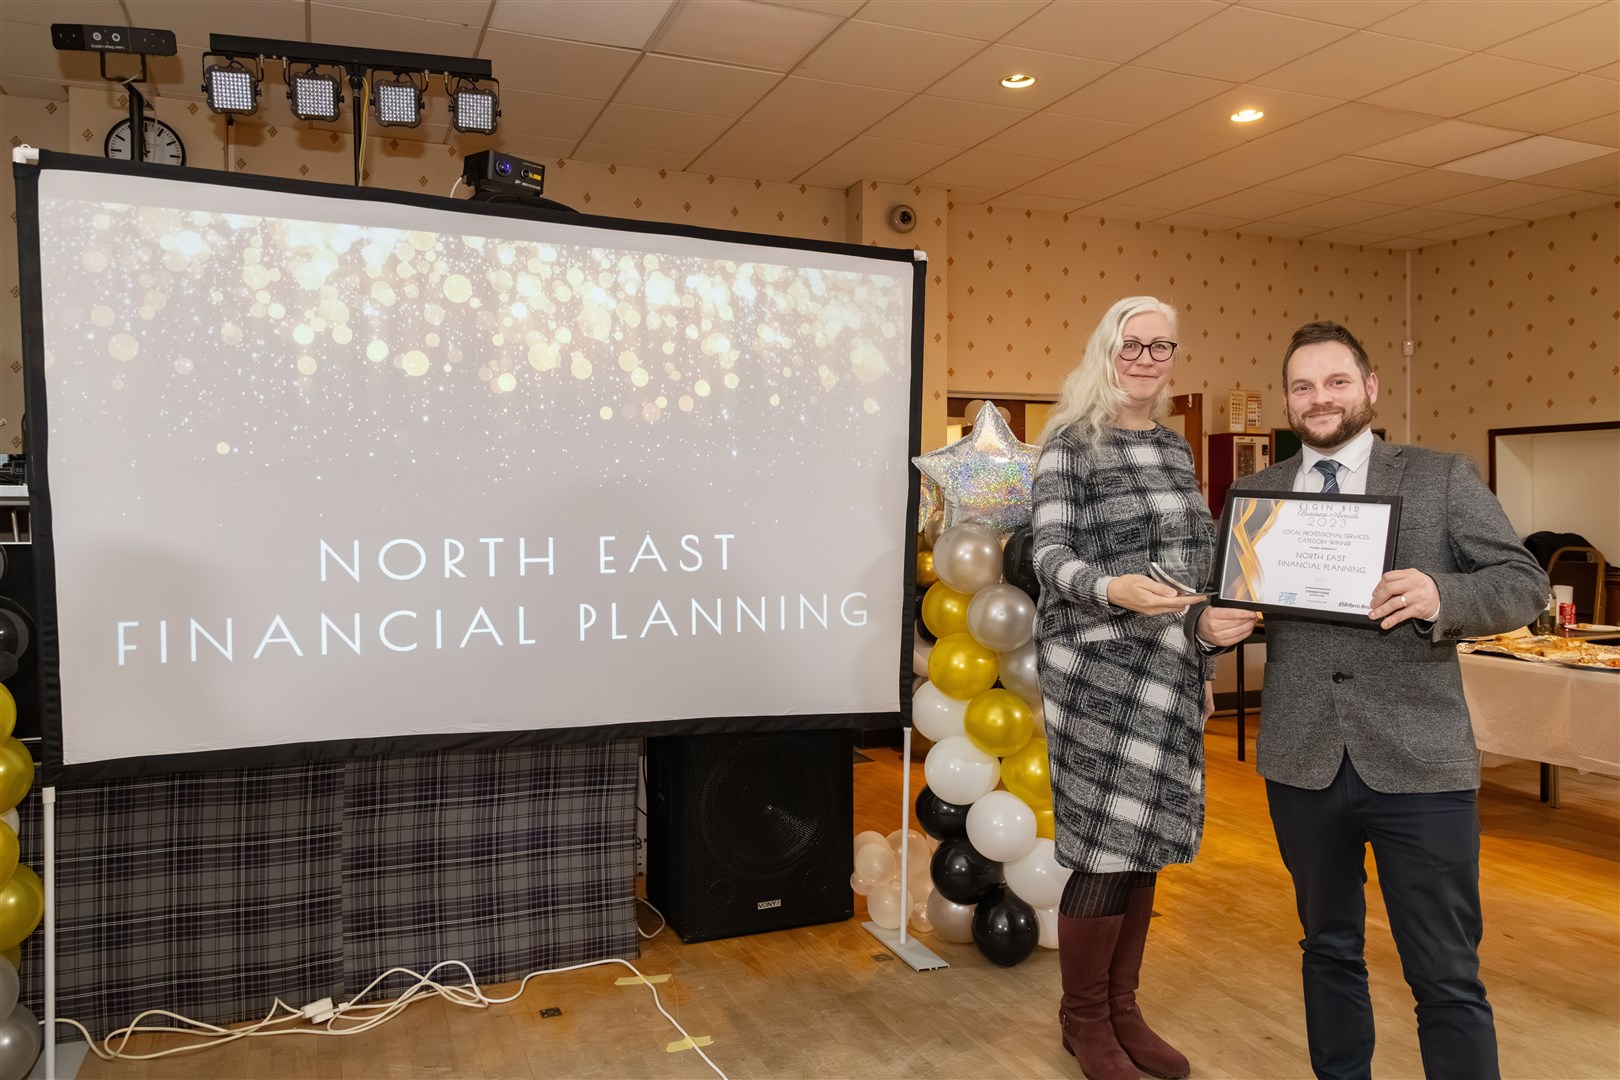 Lee Midlane presenting the local professional services award to North East Financial Planning's Darren MacDonald.